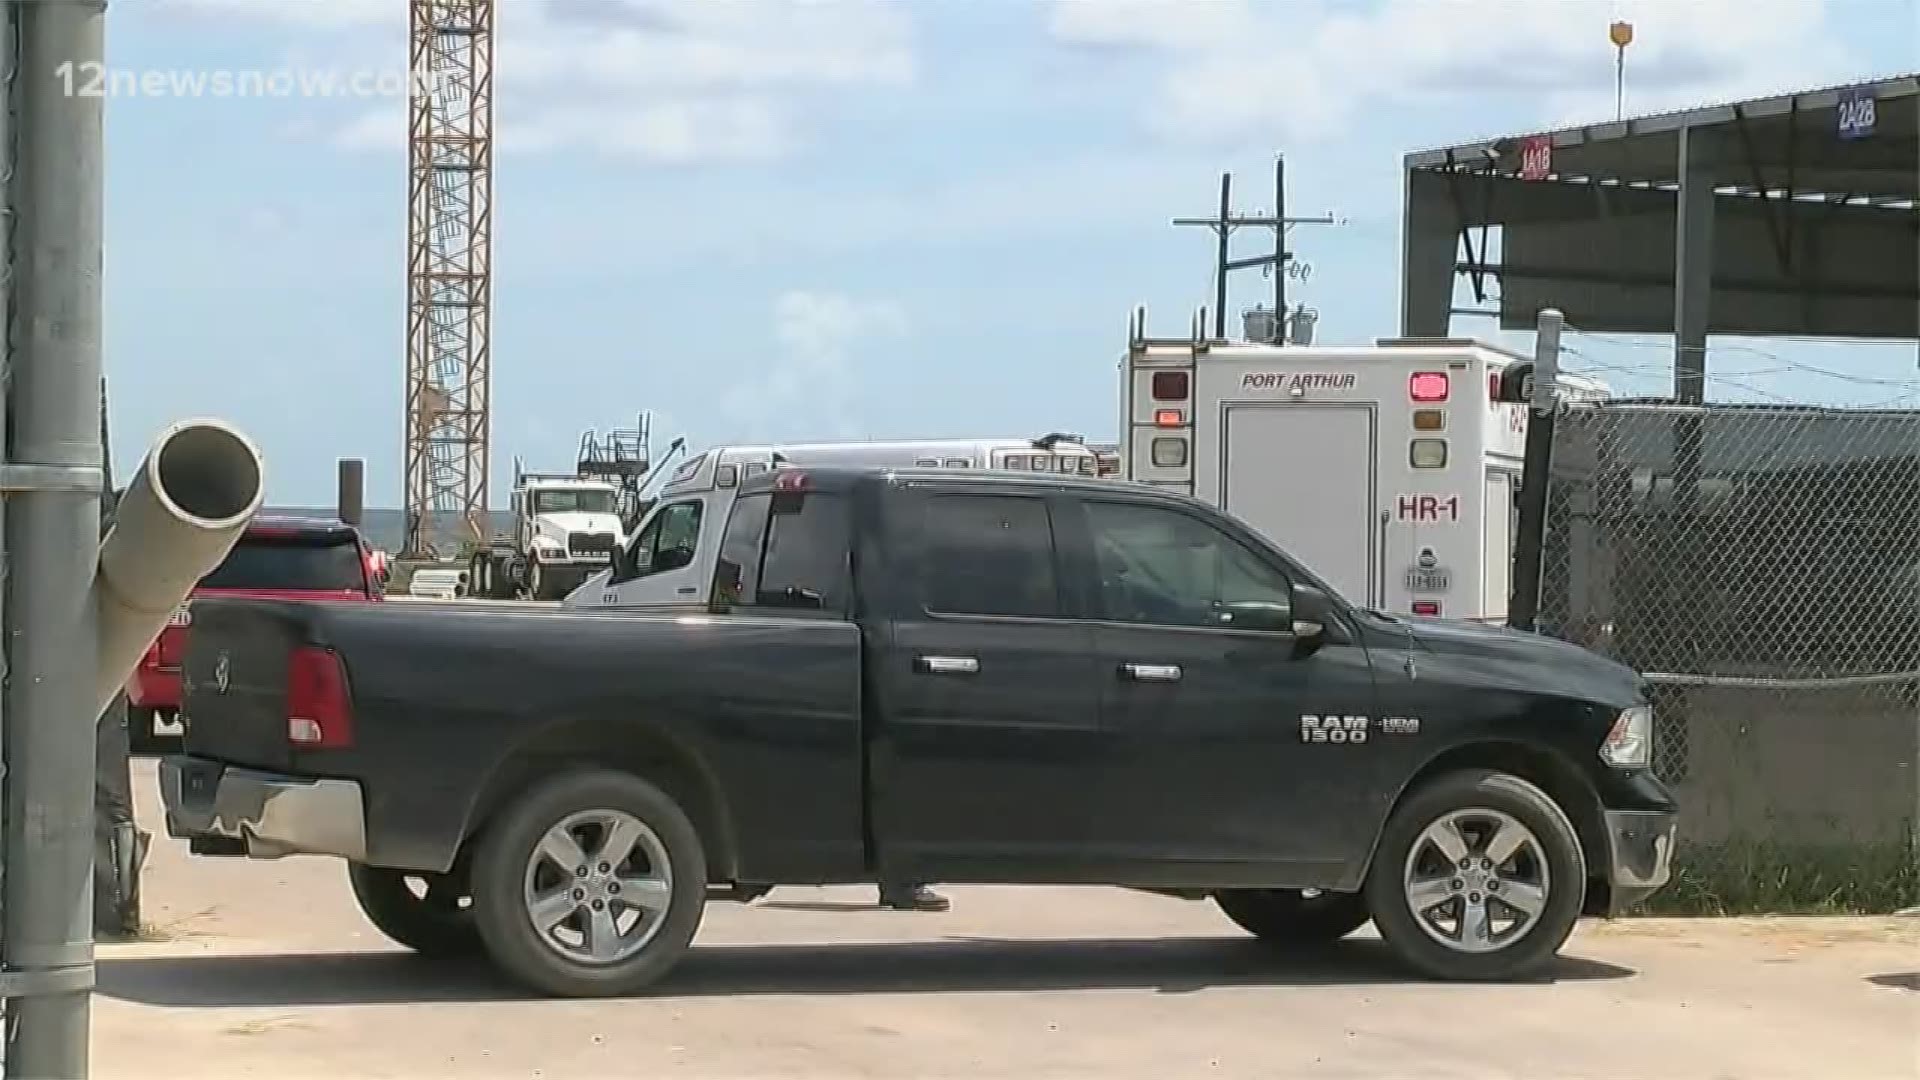 Port Arthur Police investigating how a man died today at a marine services company